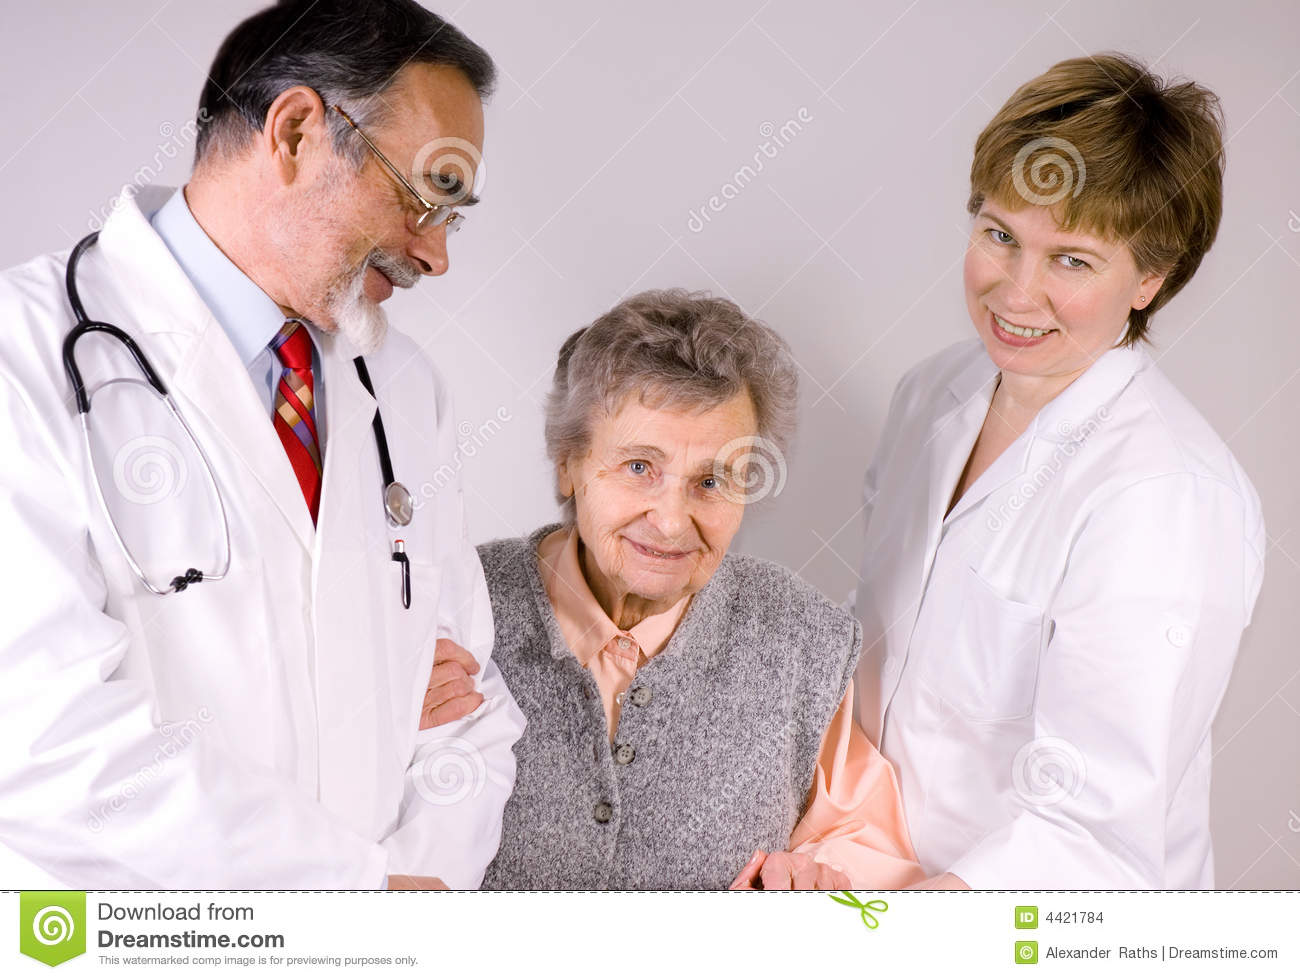 Health Care Workers Stock Images   Image  4421784